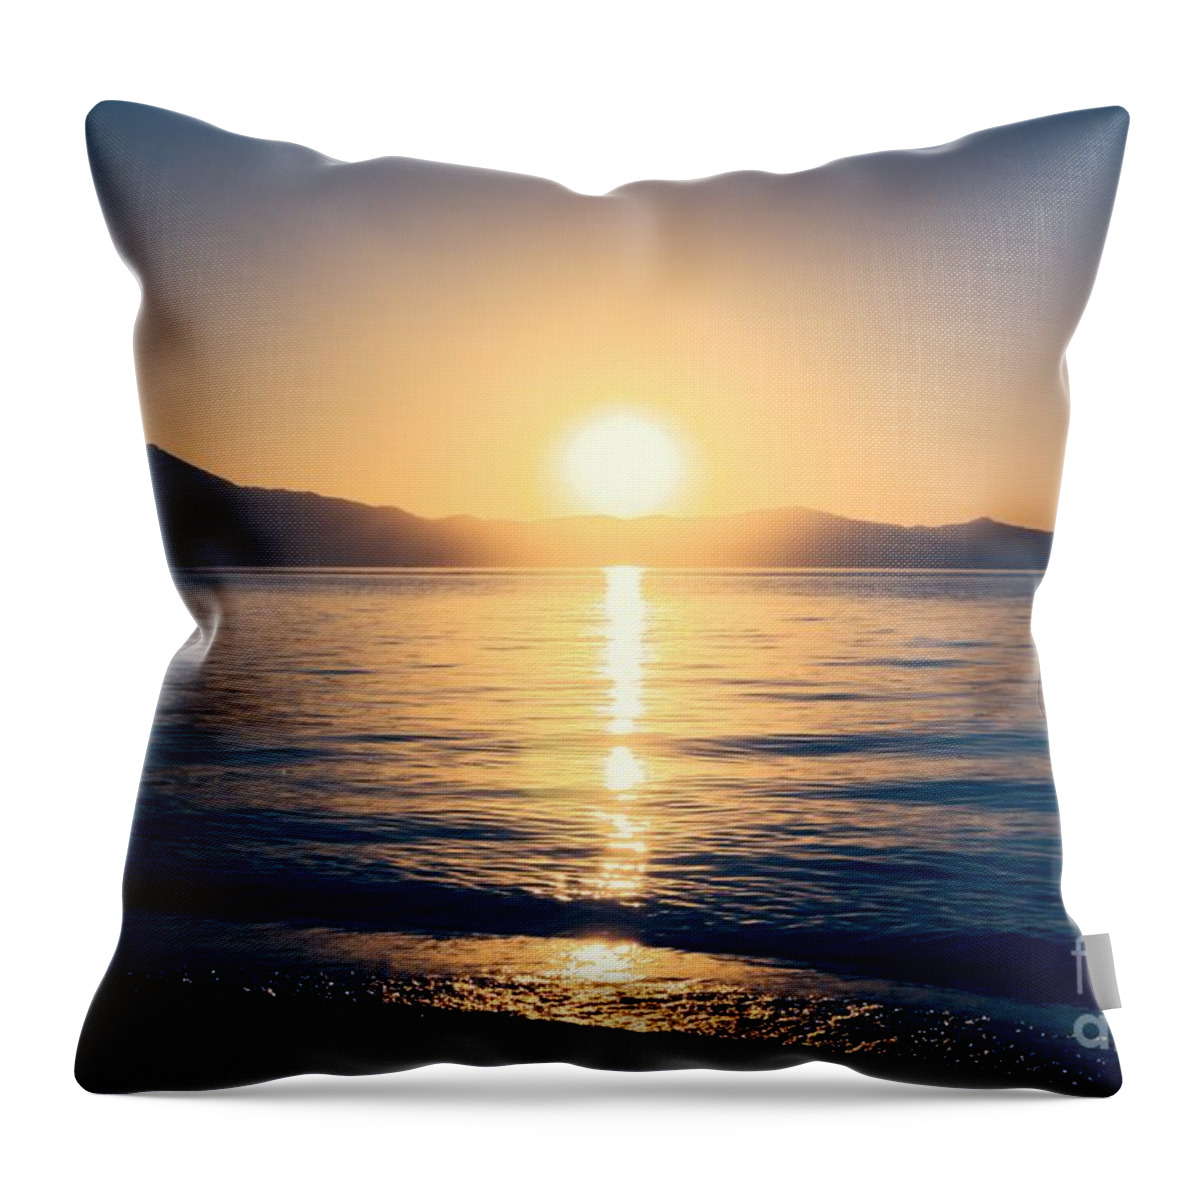 Soft Throw Pillow featuring the photograph Soft Sunset Lake by Joe Lach